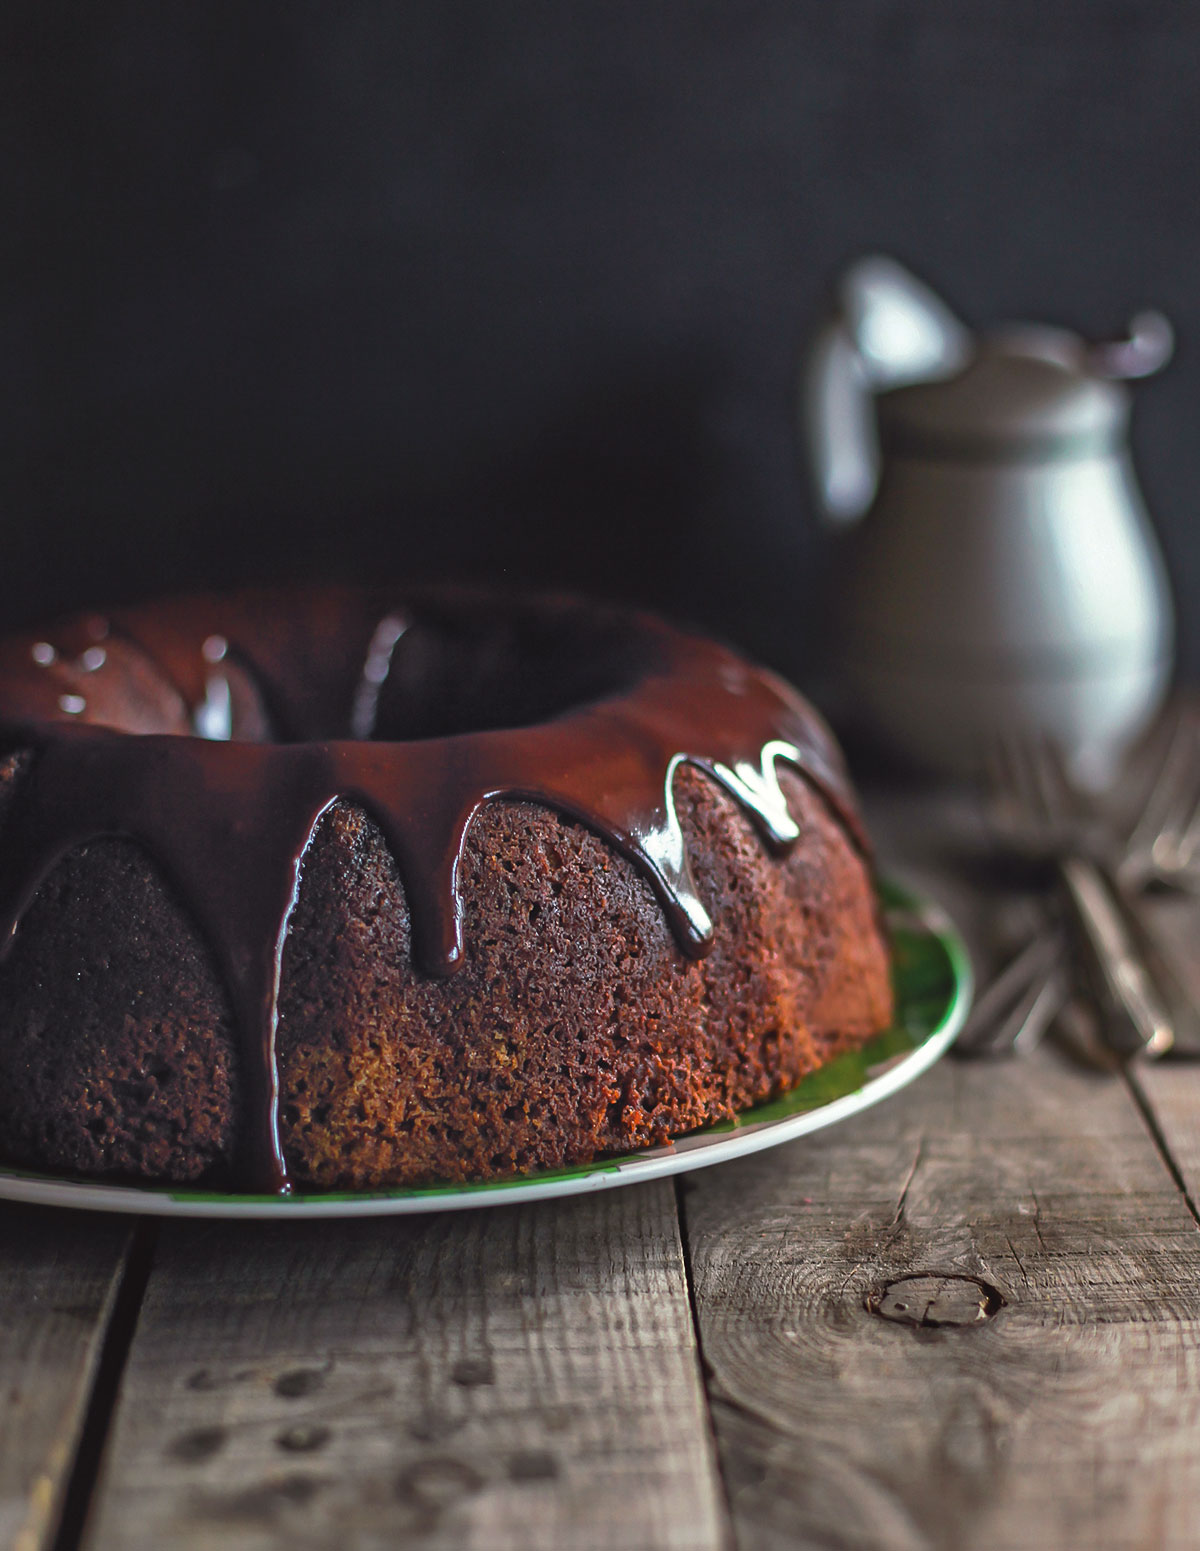 A wooden table with a pitcher and a green plate holding a chocolate bundt cake drizzled in chocolate ganache.